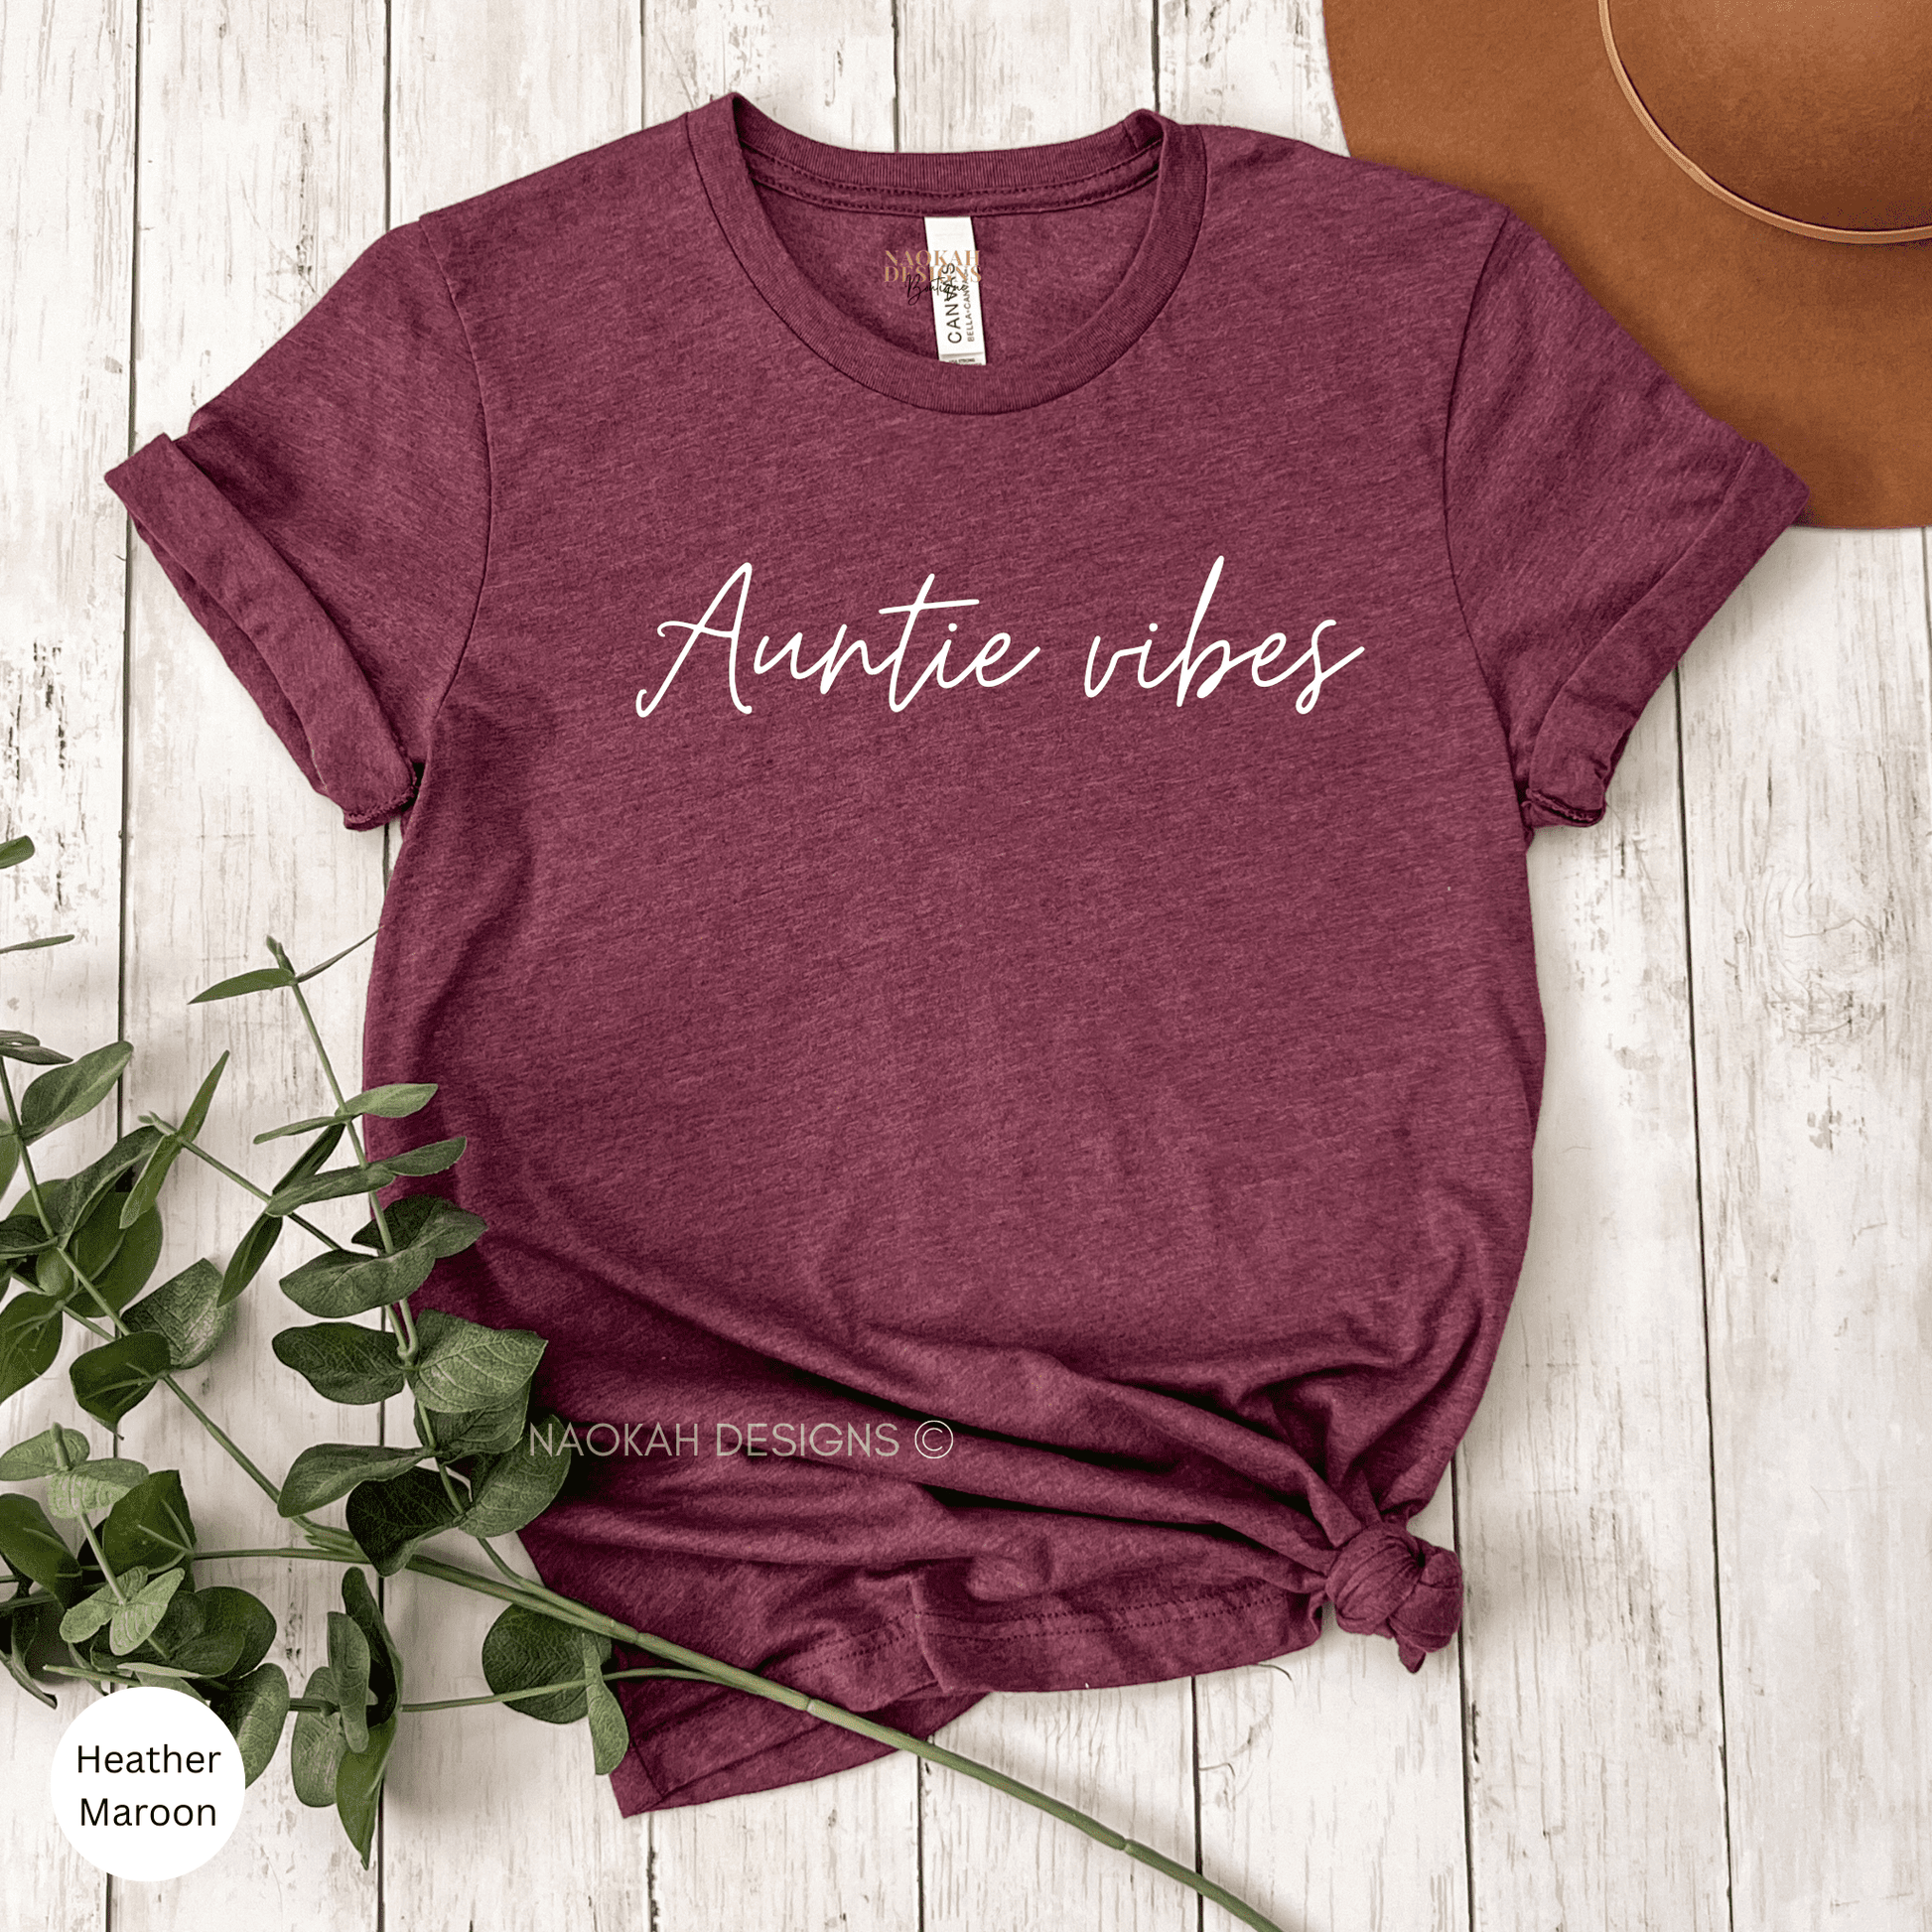 Auntie vibes shirt, New aunt shirt, native auntie, metis auntie, inuit auntie, Indigenous matriarch shirt, gift for sister, Funtie Shirt, Deadly Auntie, cool aunt club, Aunticorn shirt, Auntie shark shirt, auntiesaurus shirt, auntie bear shirt